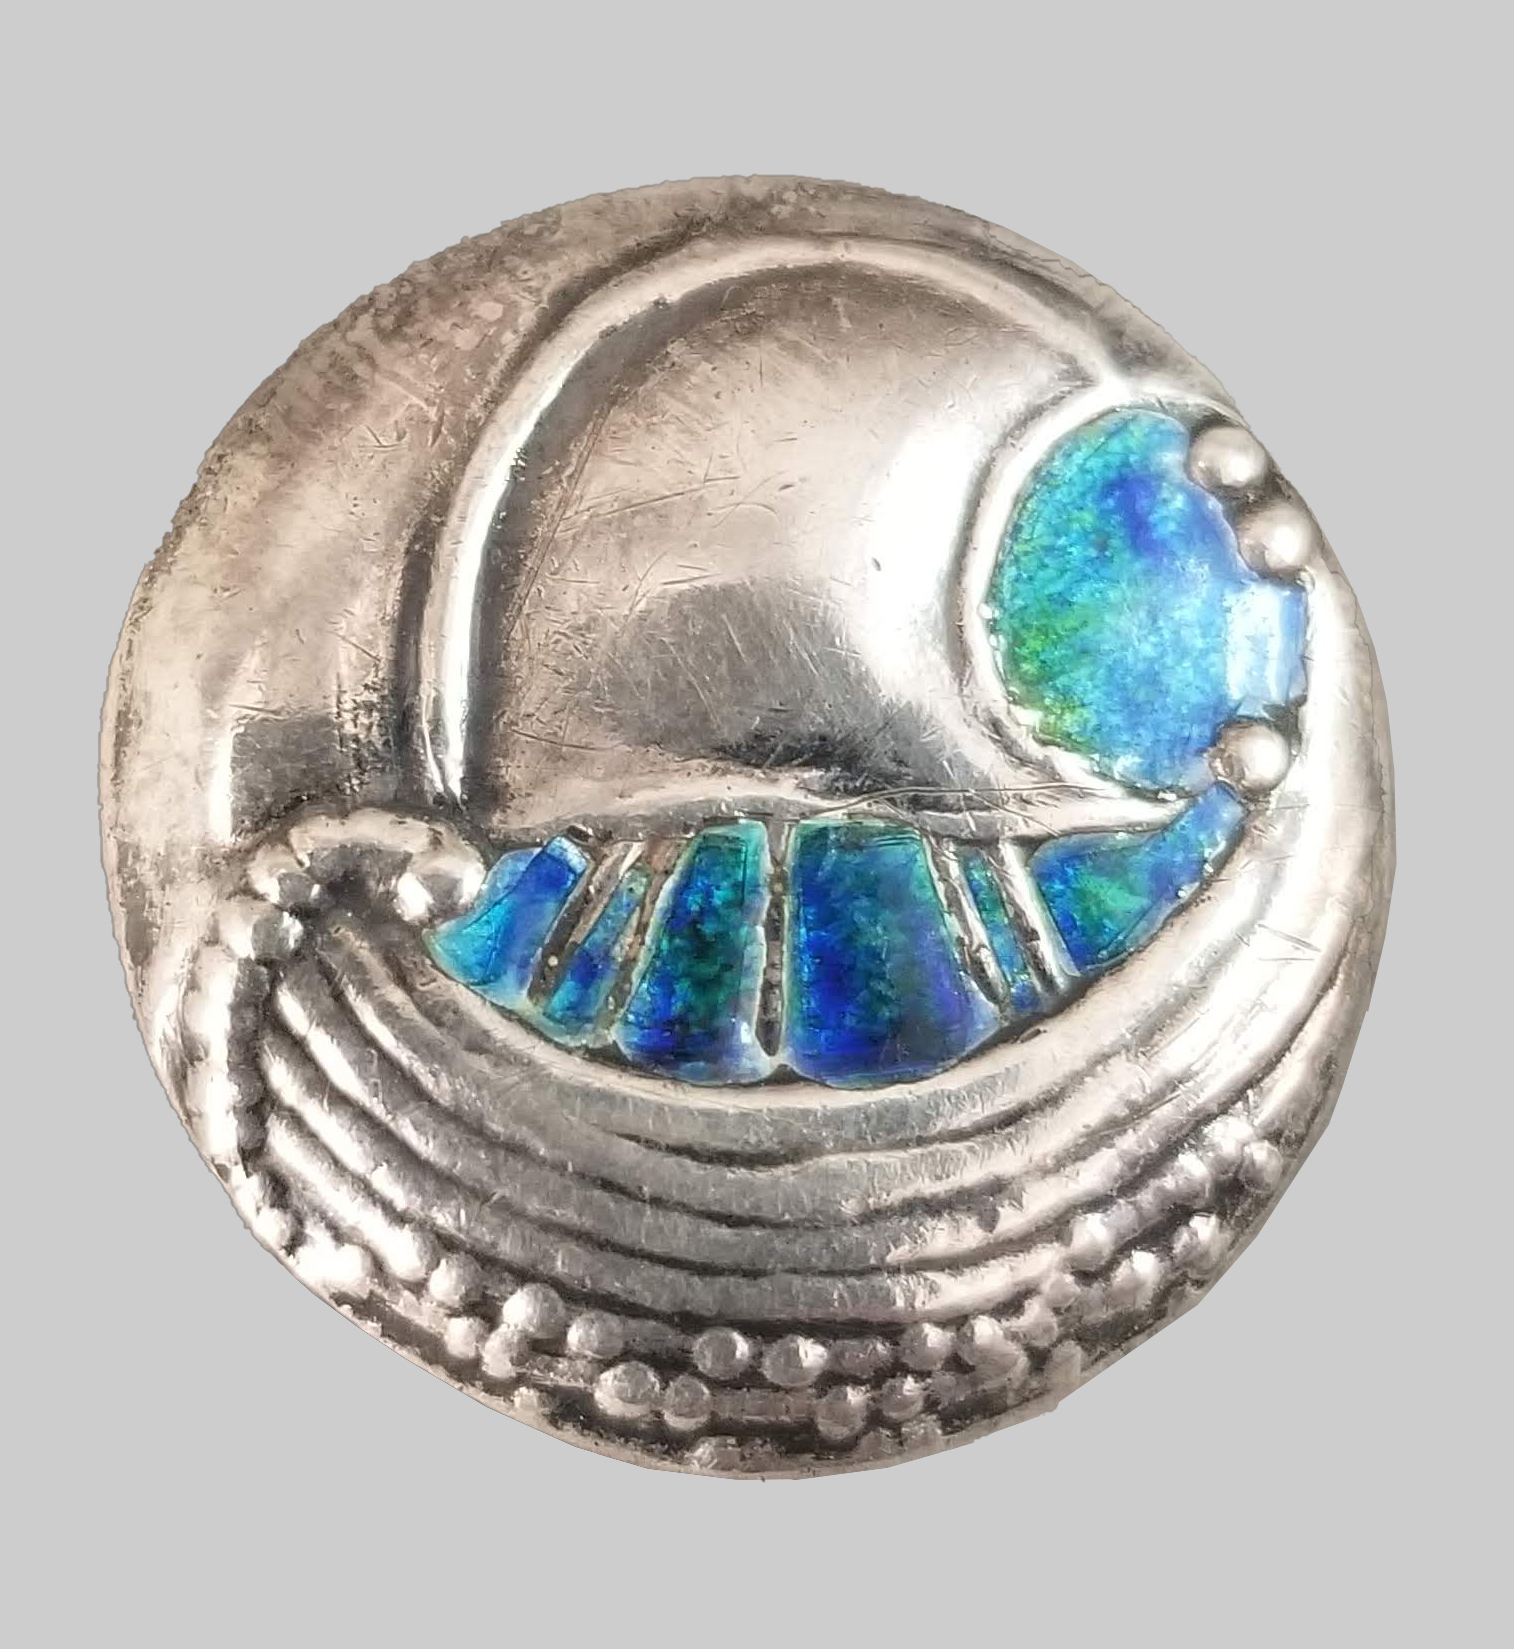 Fig. 6 - Attributed to A.H. Jones, Detail of buttons with galleons, 1907, sterling silver and enamel, TRRF Collection.